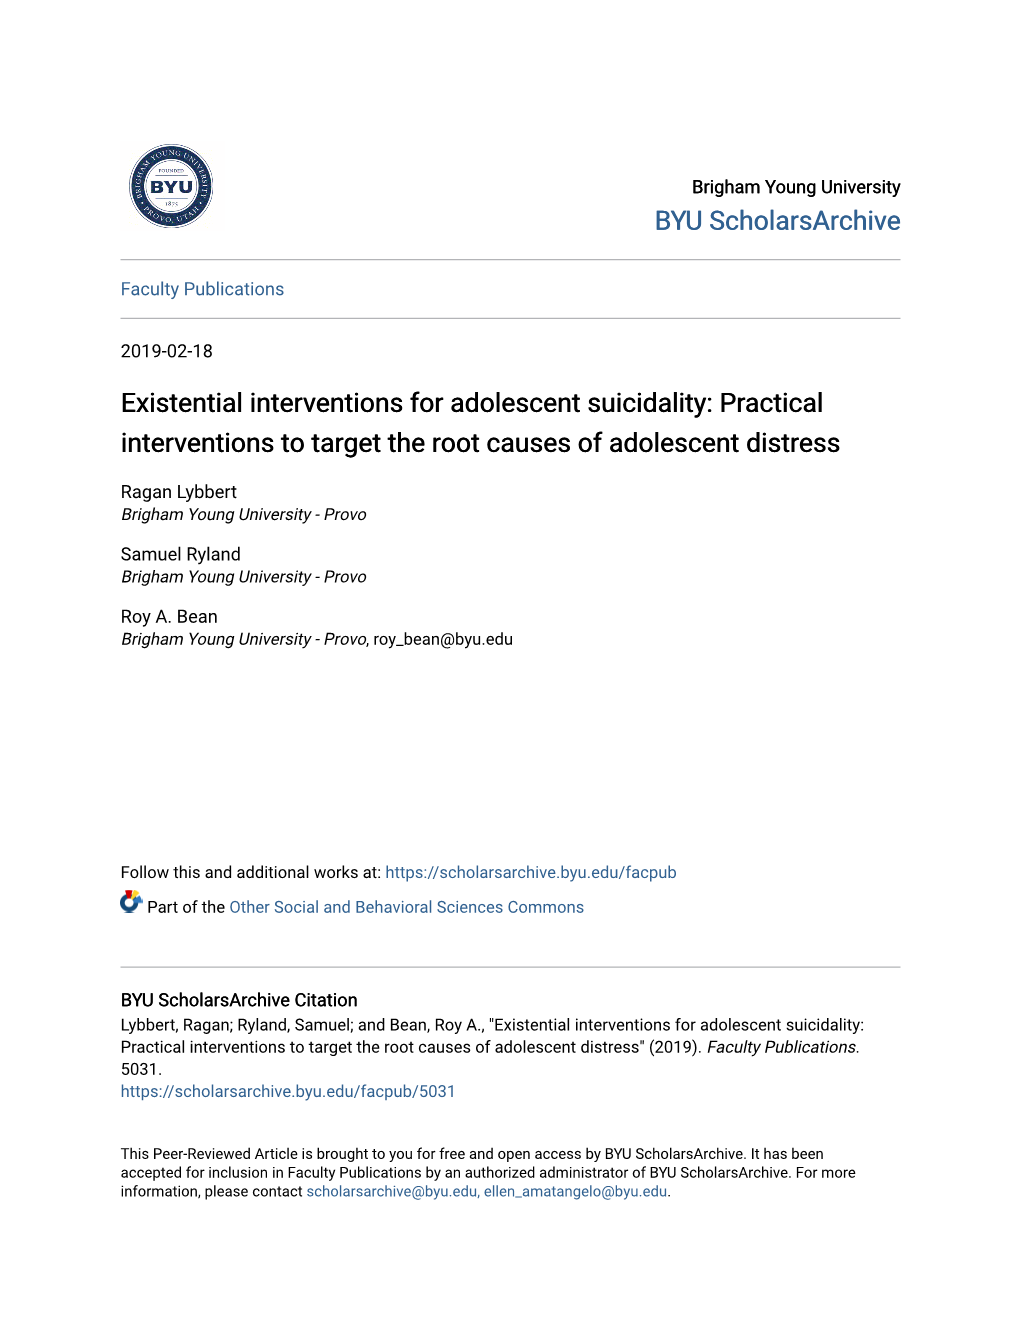 Existential Interventions for Adolescent Suicidality: Practical Interventions to Target the Root Causes of Adolescent Distress